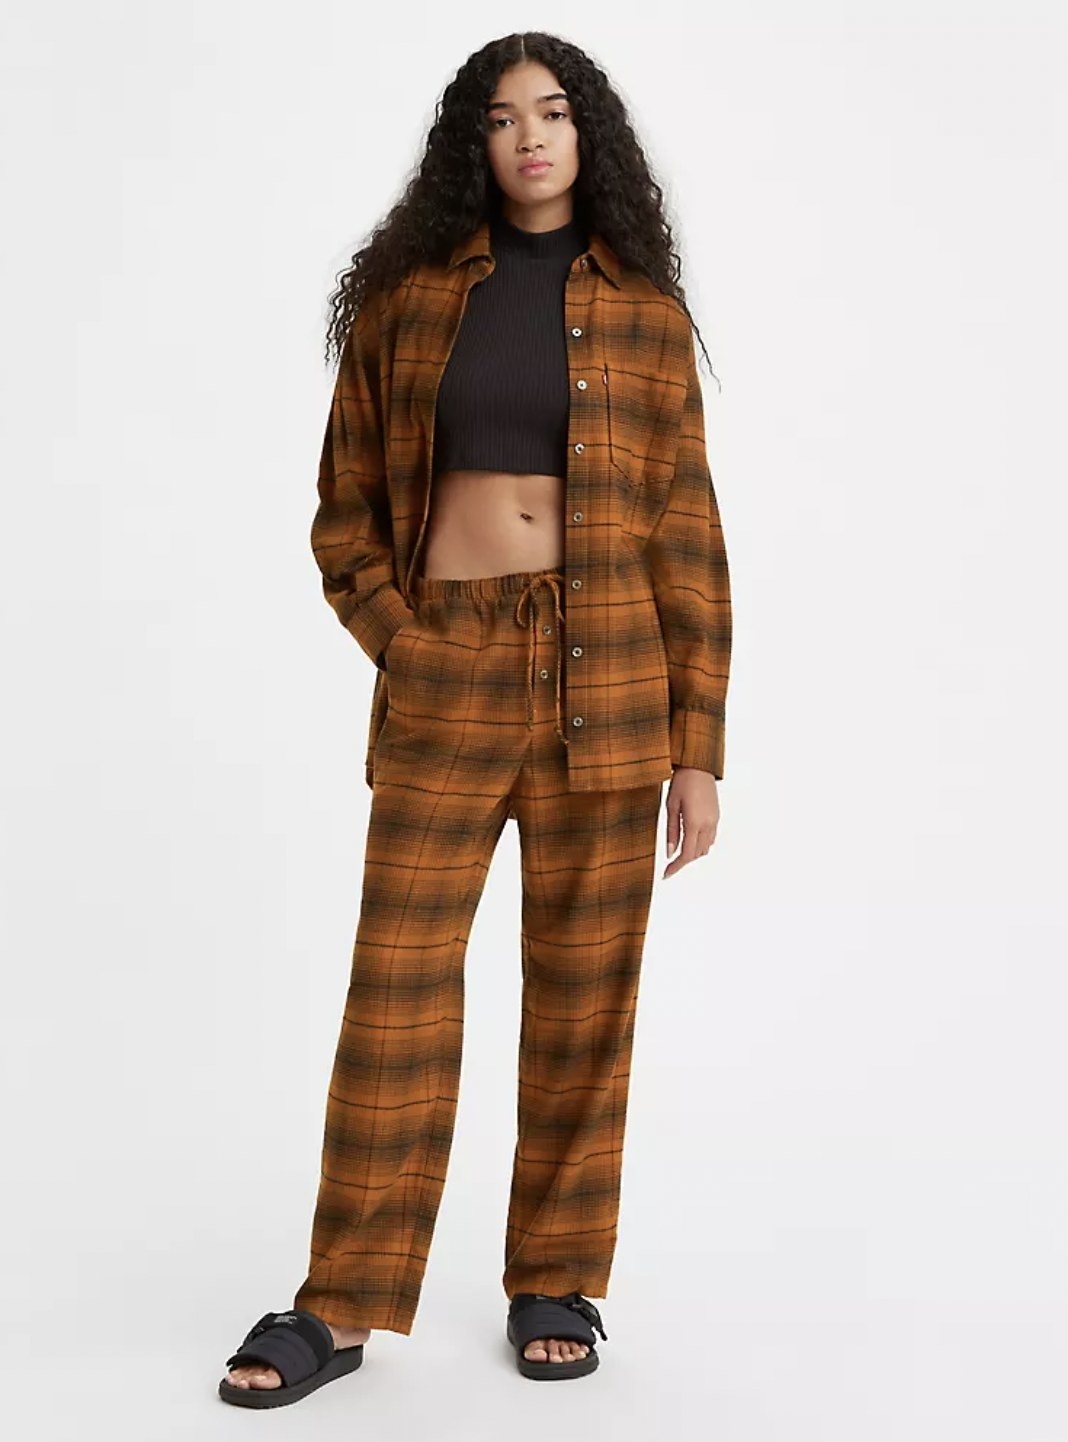 Model wearing the rust-colored plaid lounge pants with crop top and matching flannel